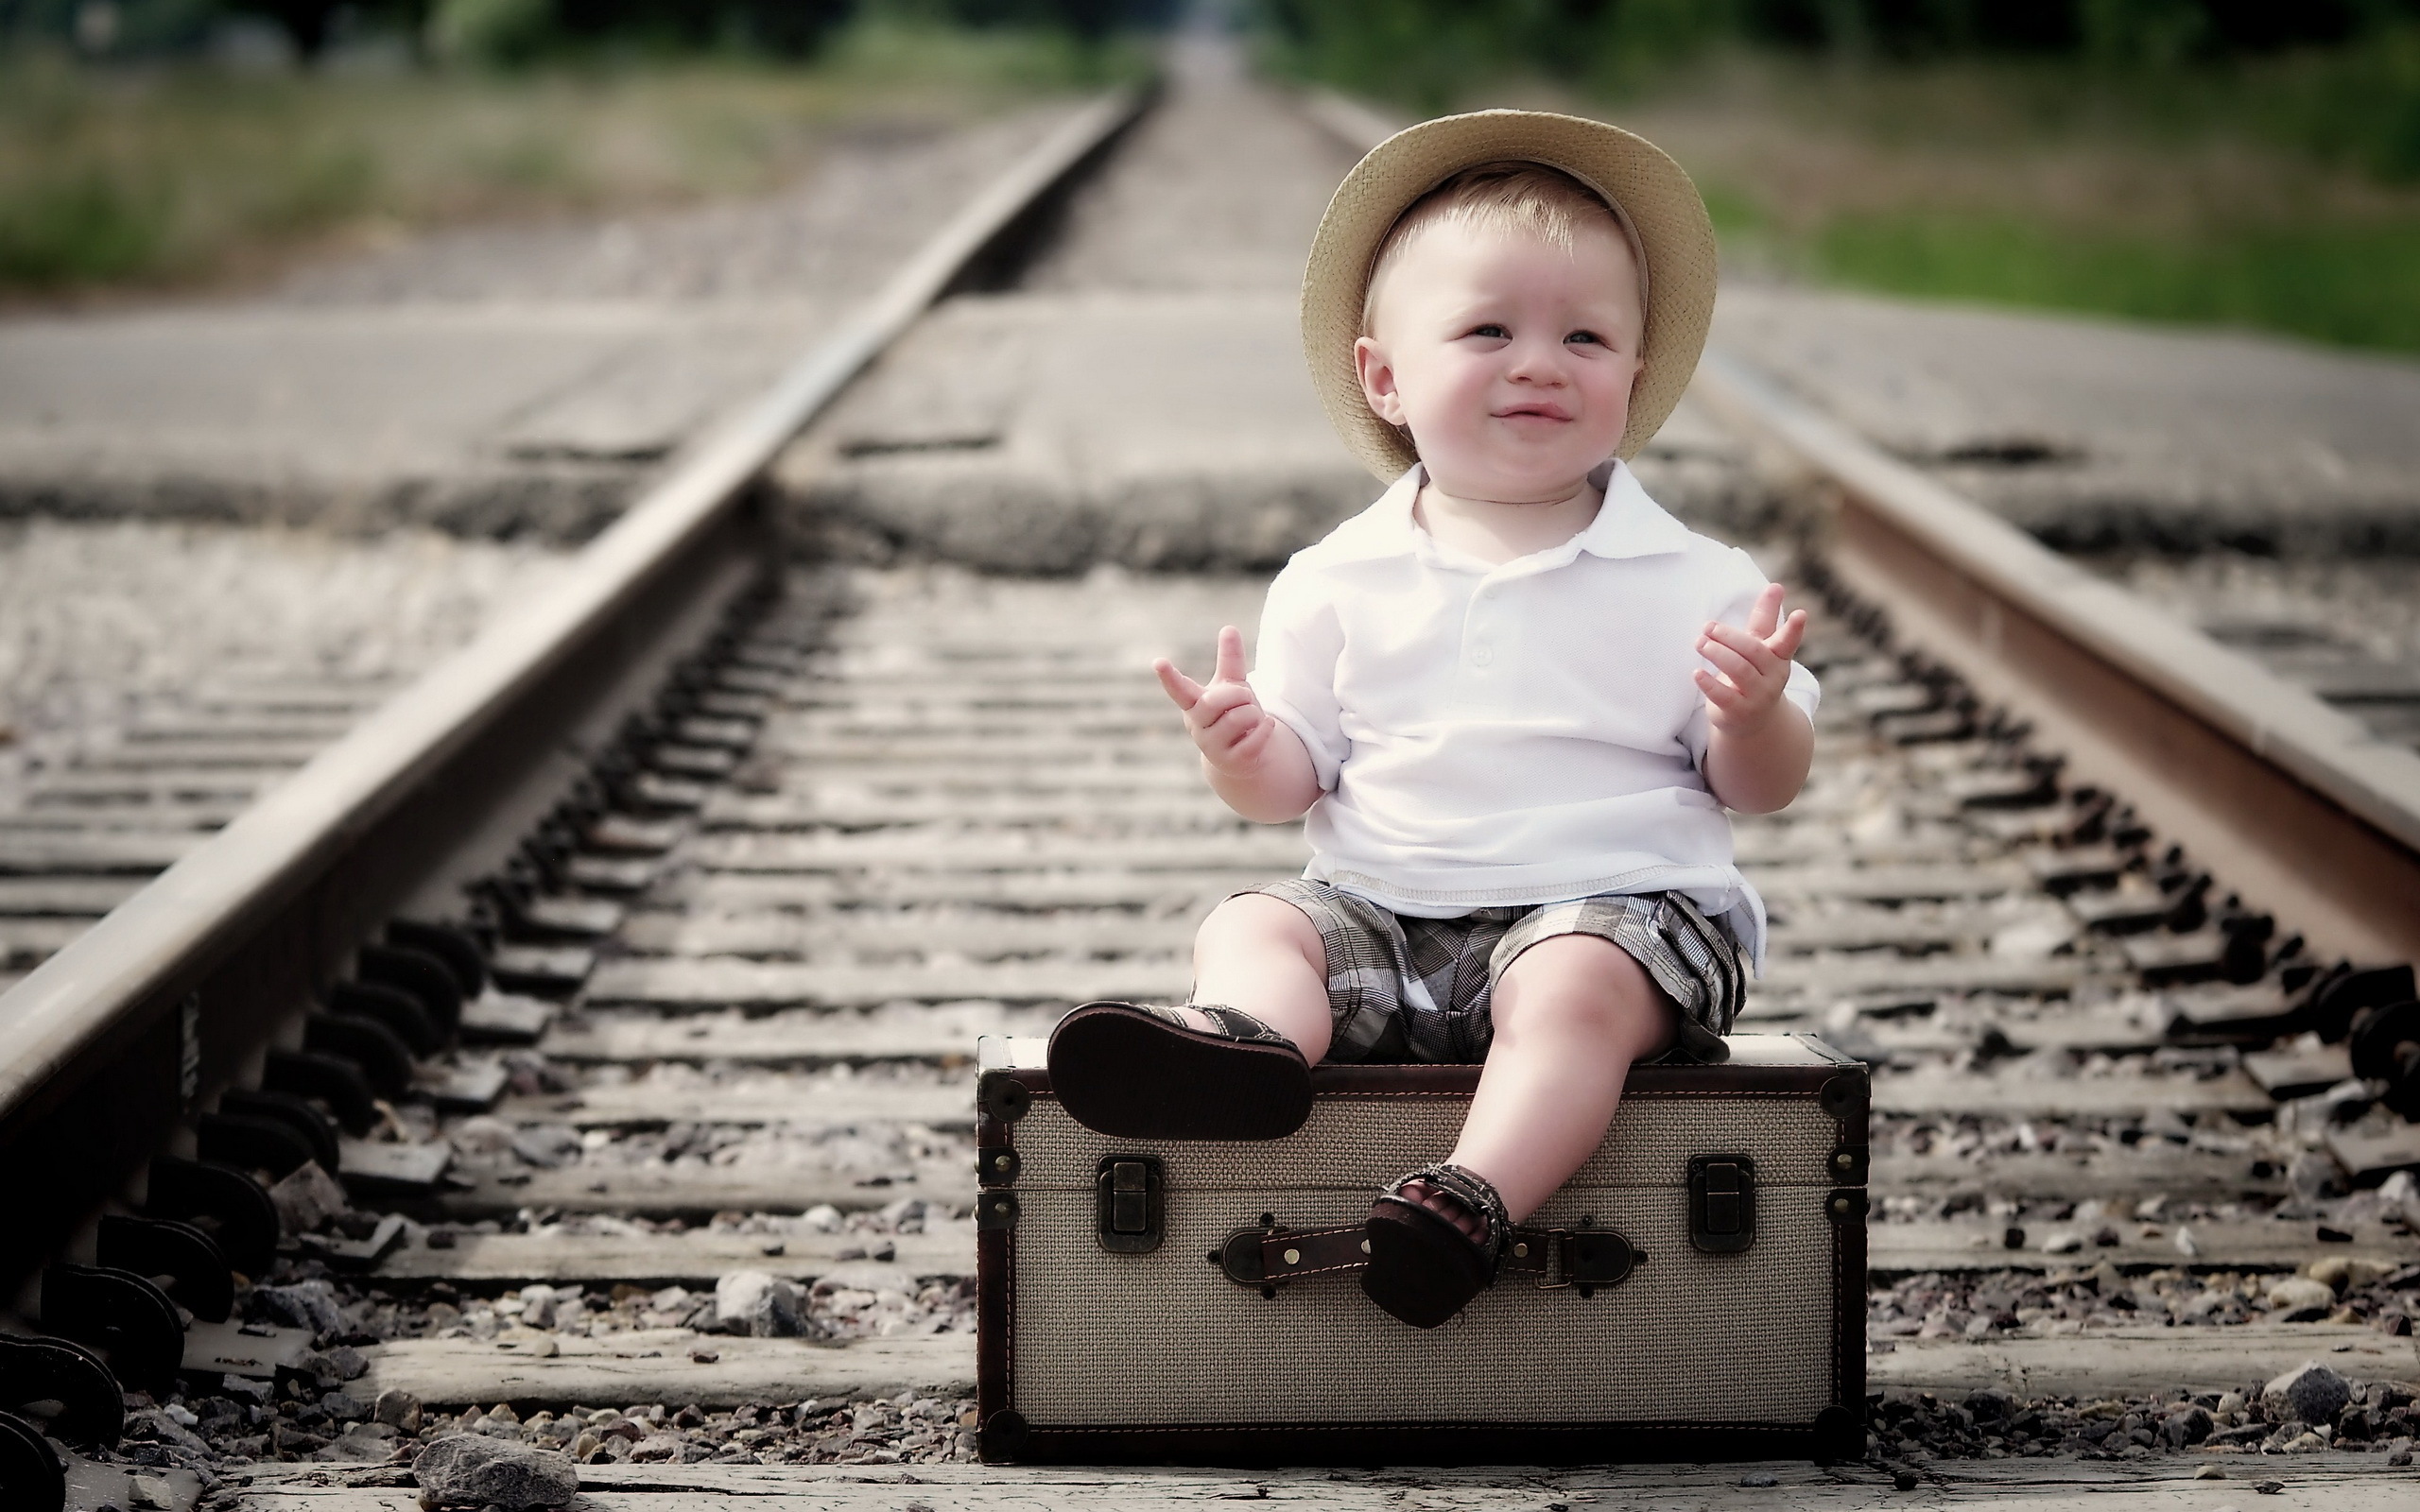 Cute Baby Latest Modeling High Definition Wallpapers - Boy Sitting In The Railway Track - HD Wallpaper 